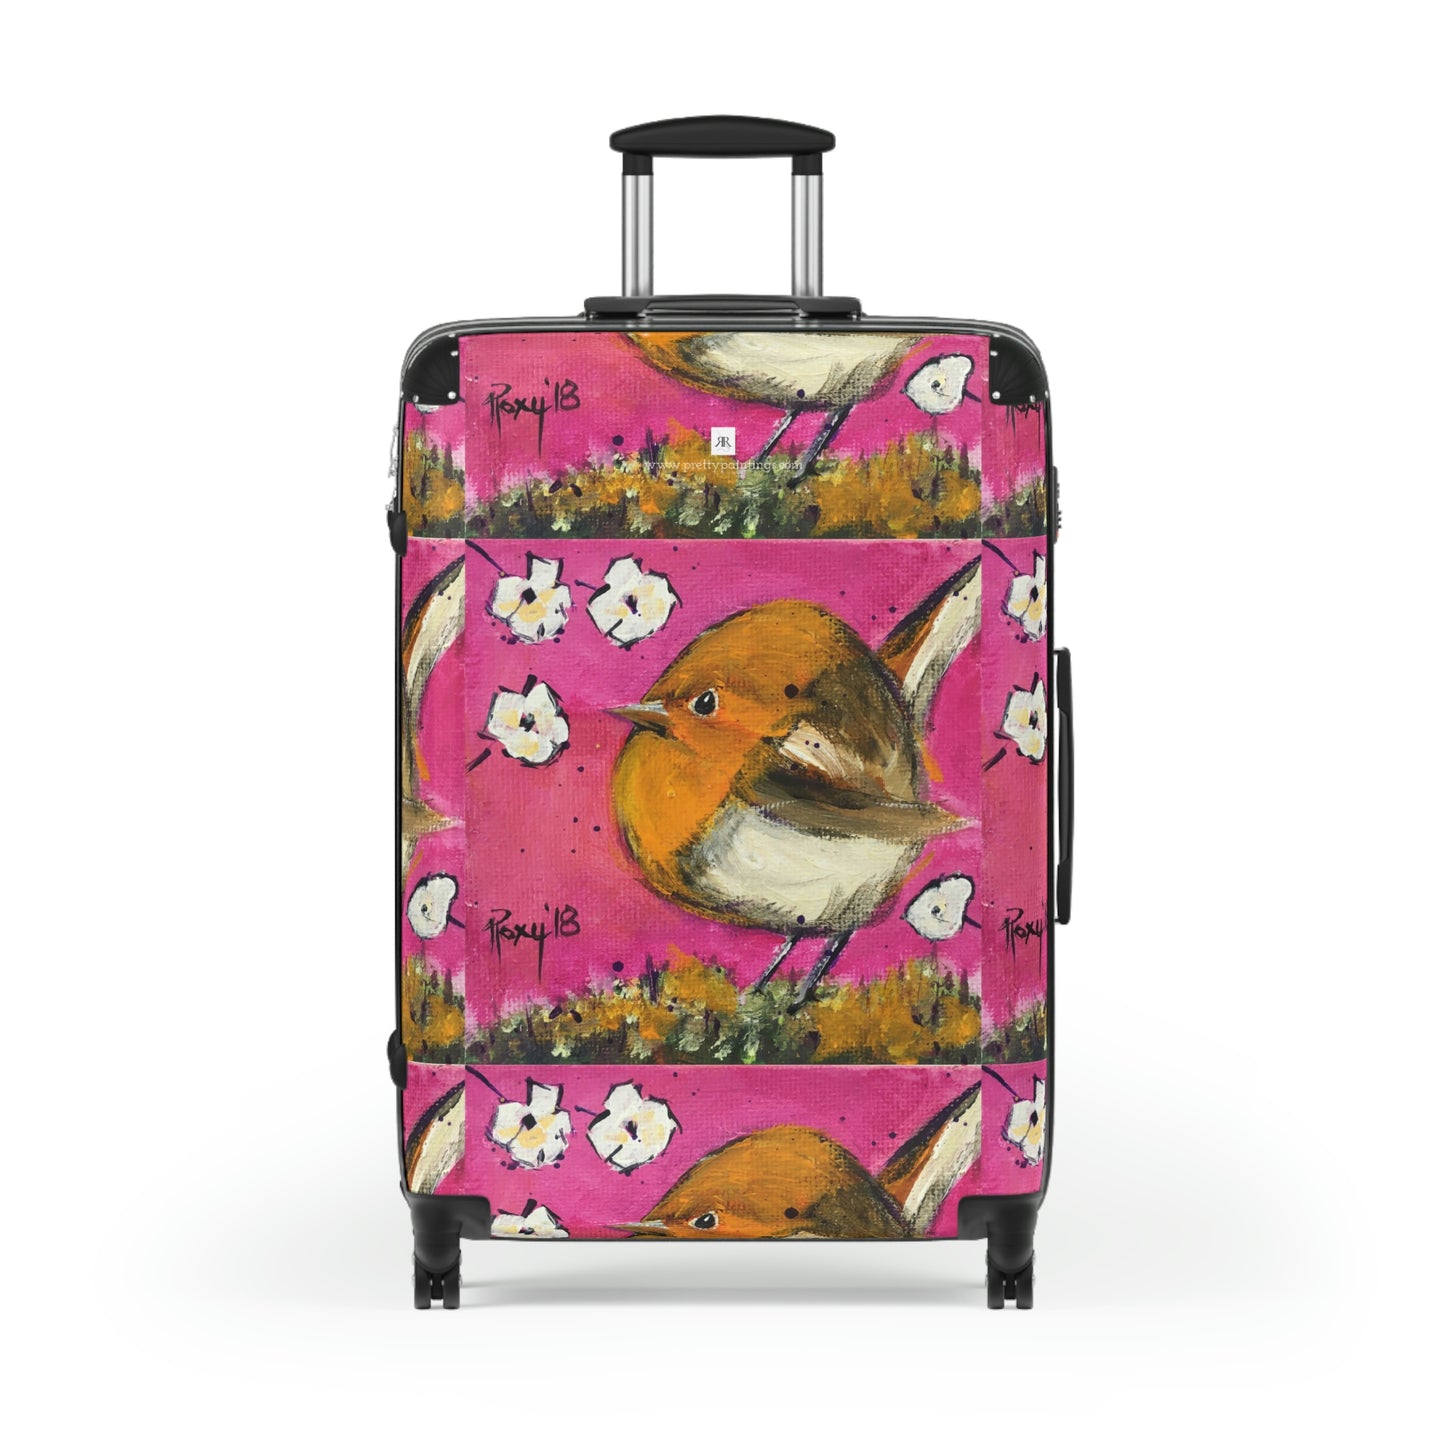 Adorable Whimsical Wren Bird Patterned Carry on Suitcase (three sizes available)